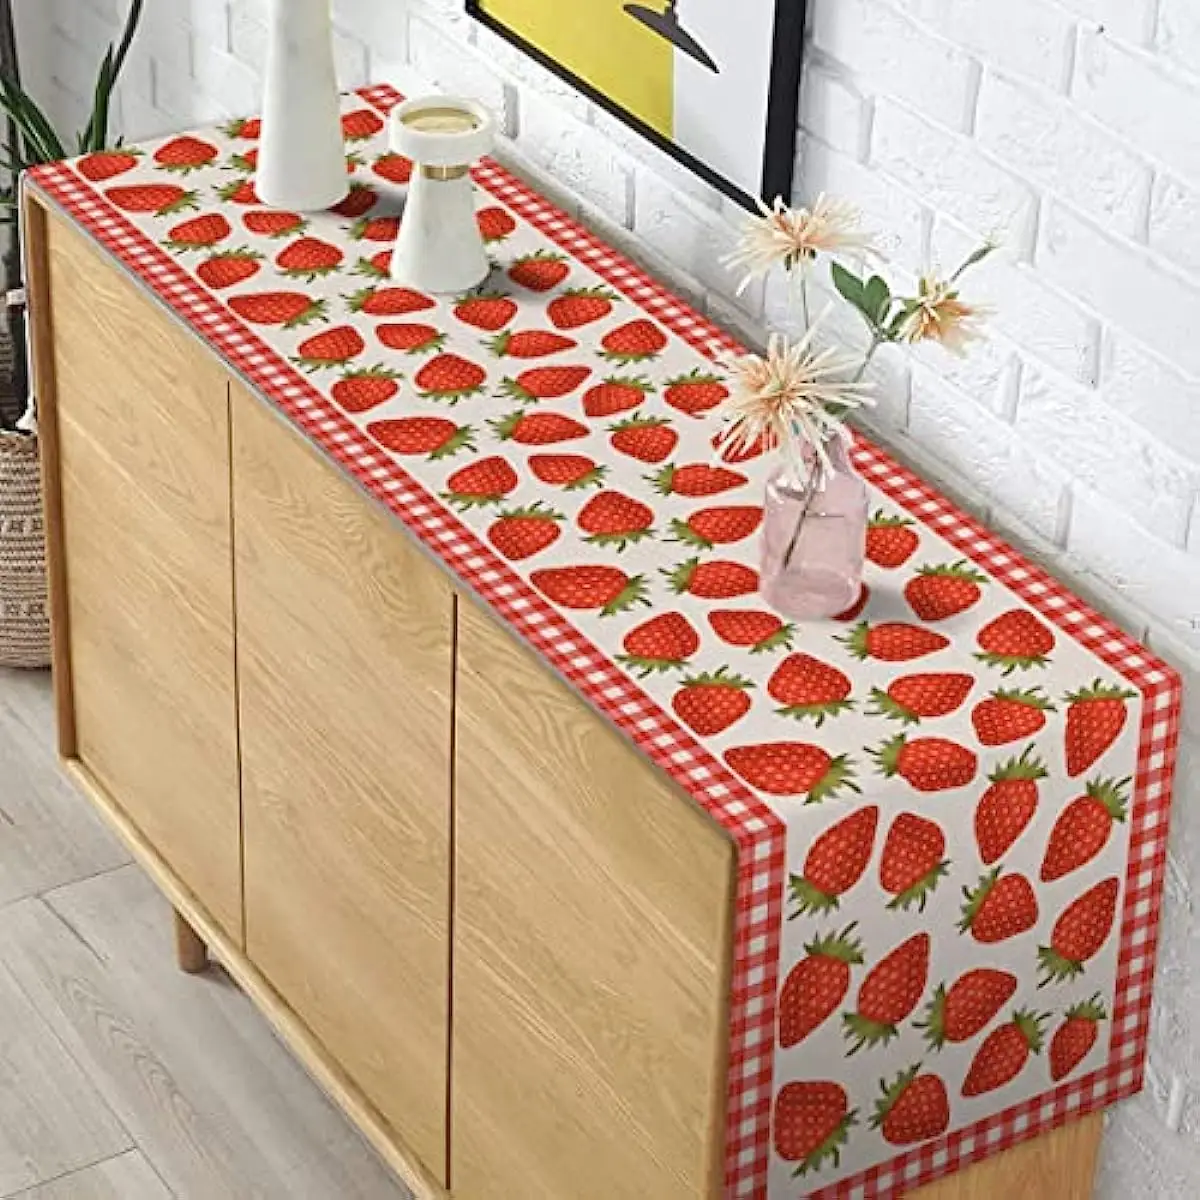 Summer Strawberry Fruit Buffalo Plaid Linen Table Runners Kitchen Table Decor Washable Dining Table Runners Party Decoration